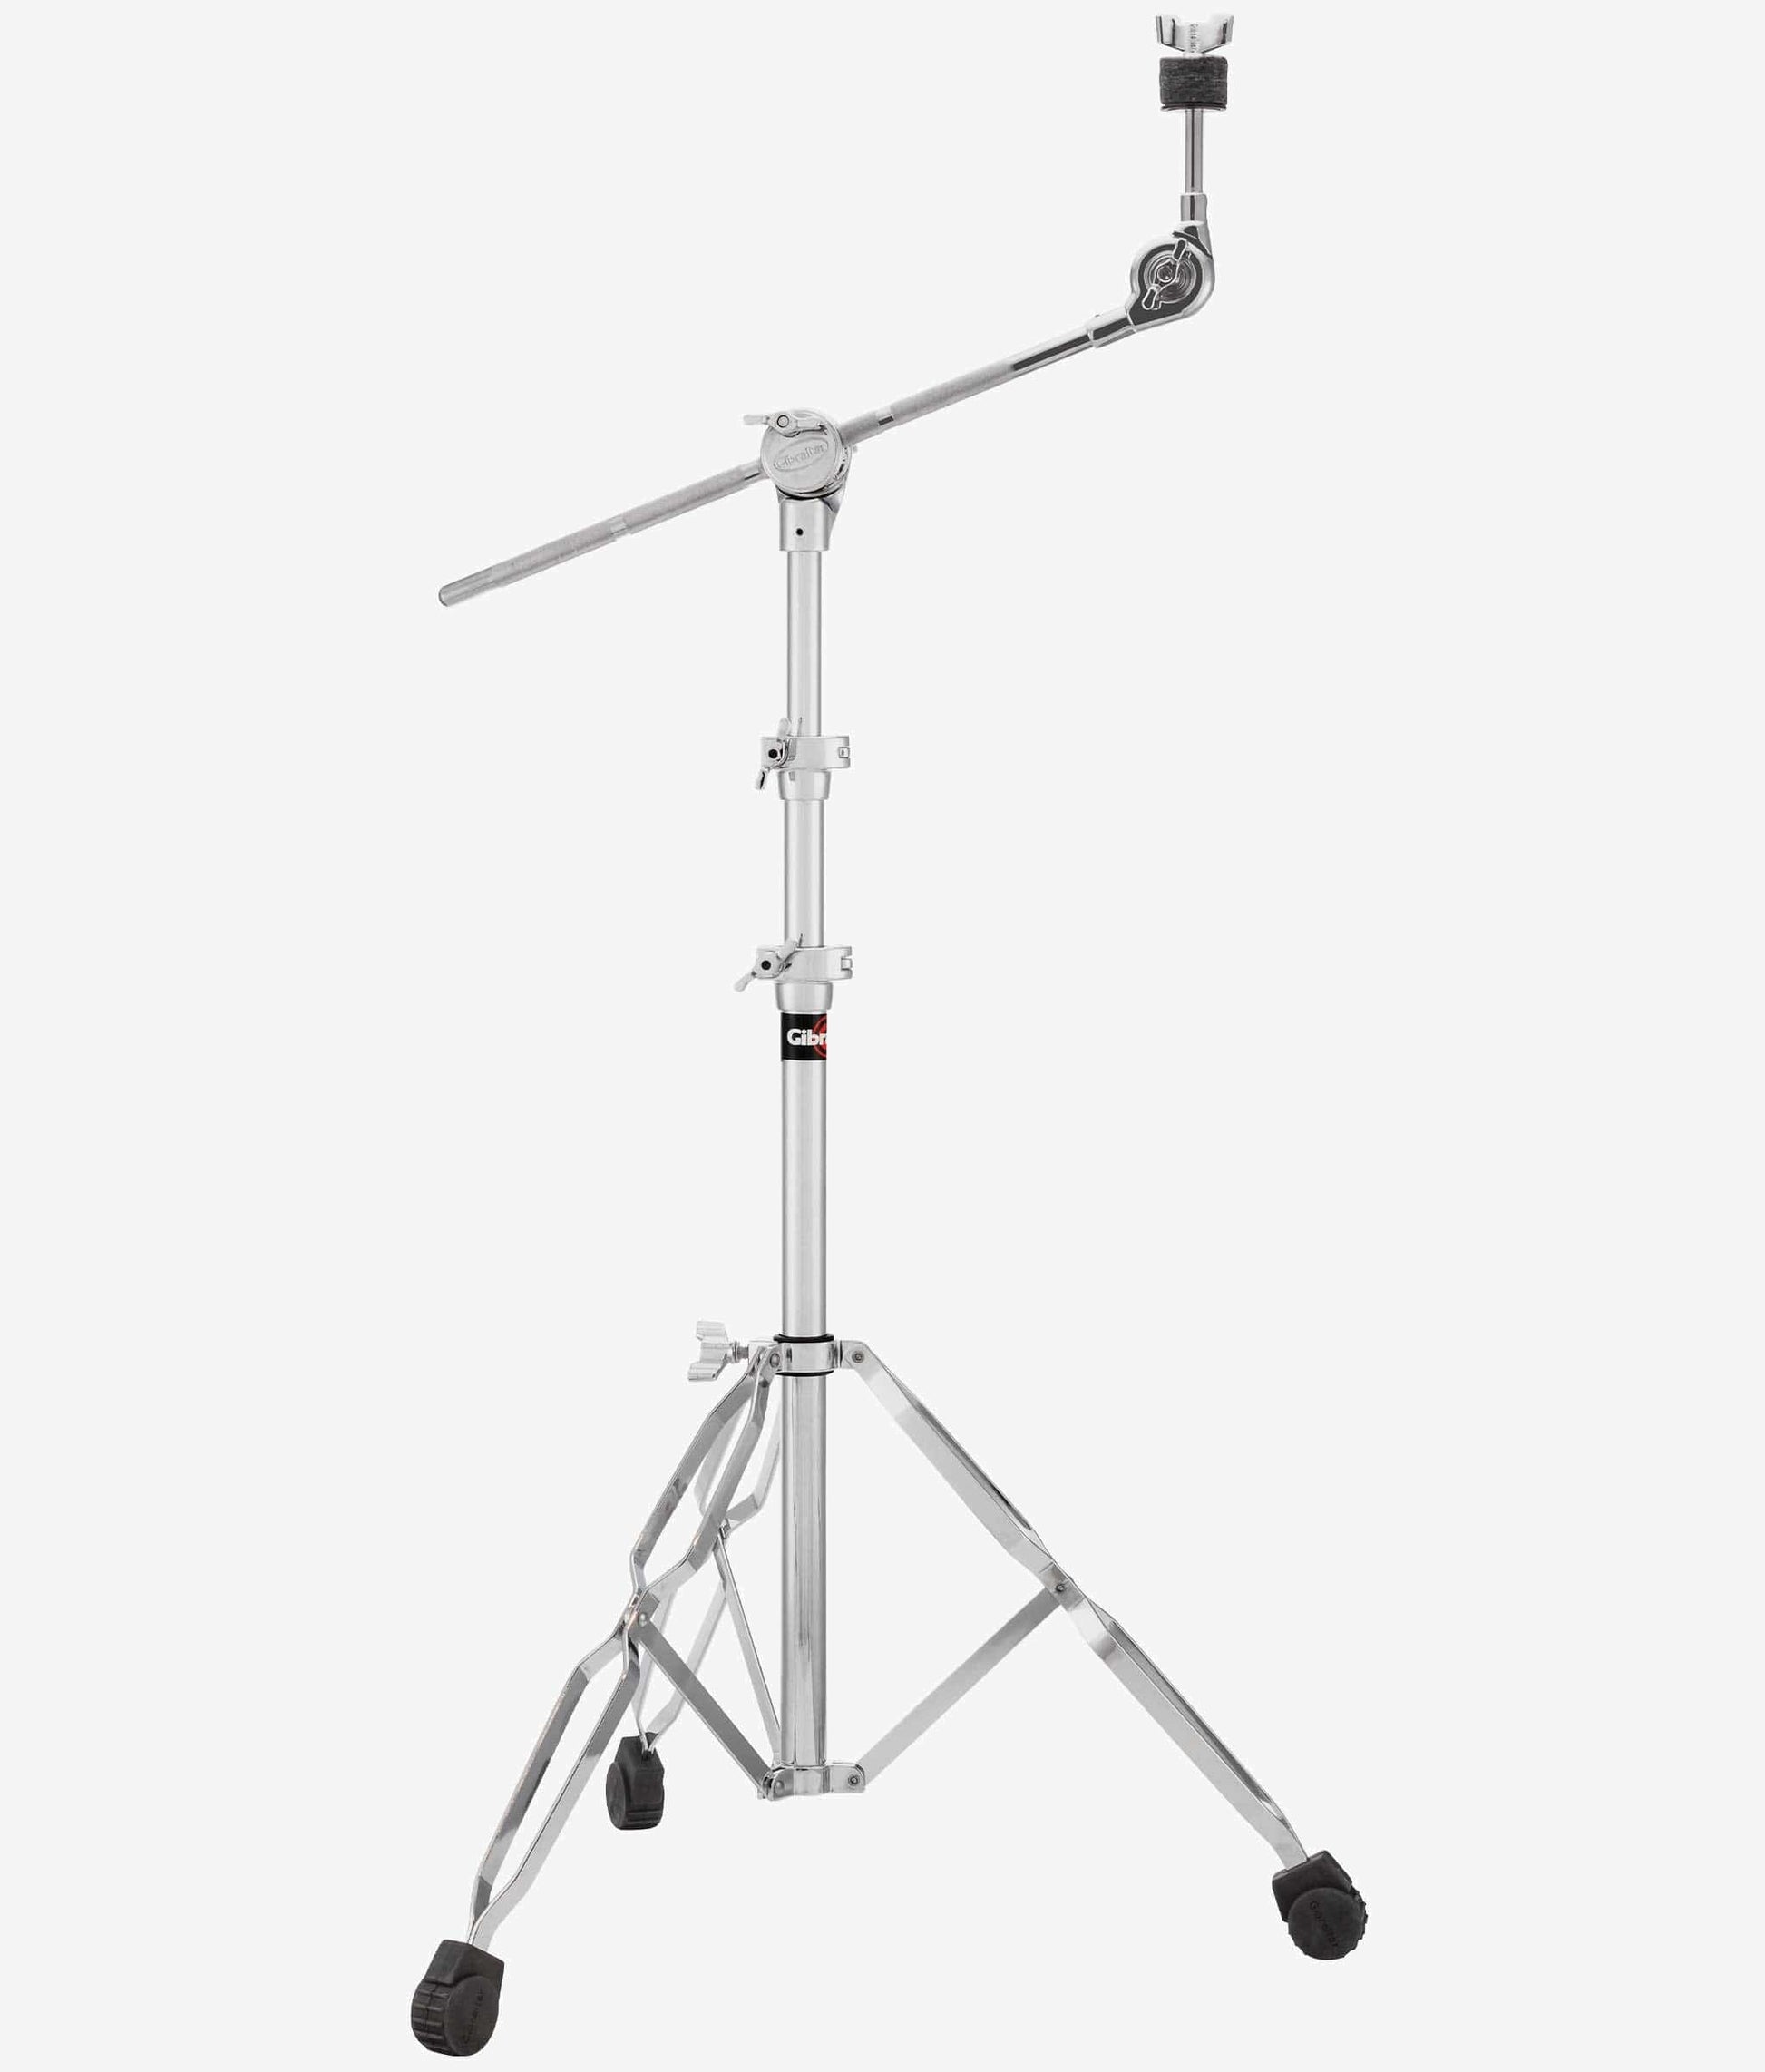  Gibraltar 5709 Medium Weight Cymbal Boom Stand cymbal boom stand